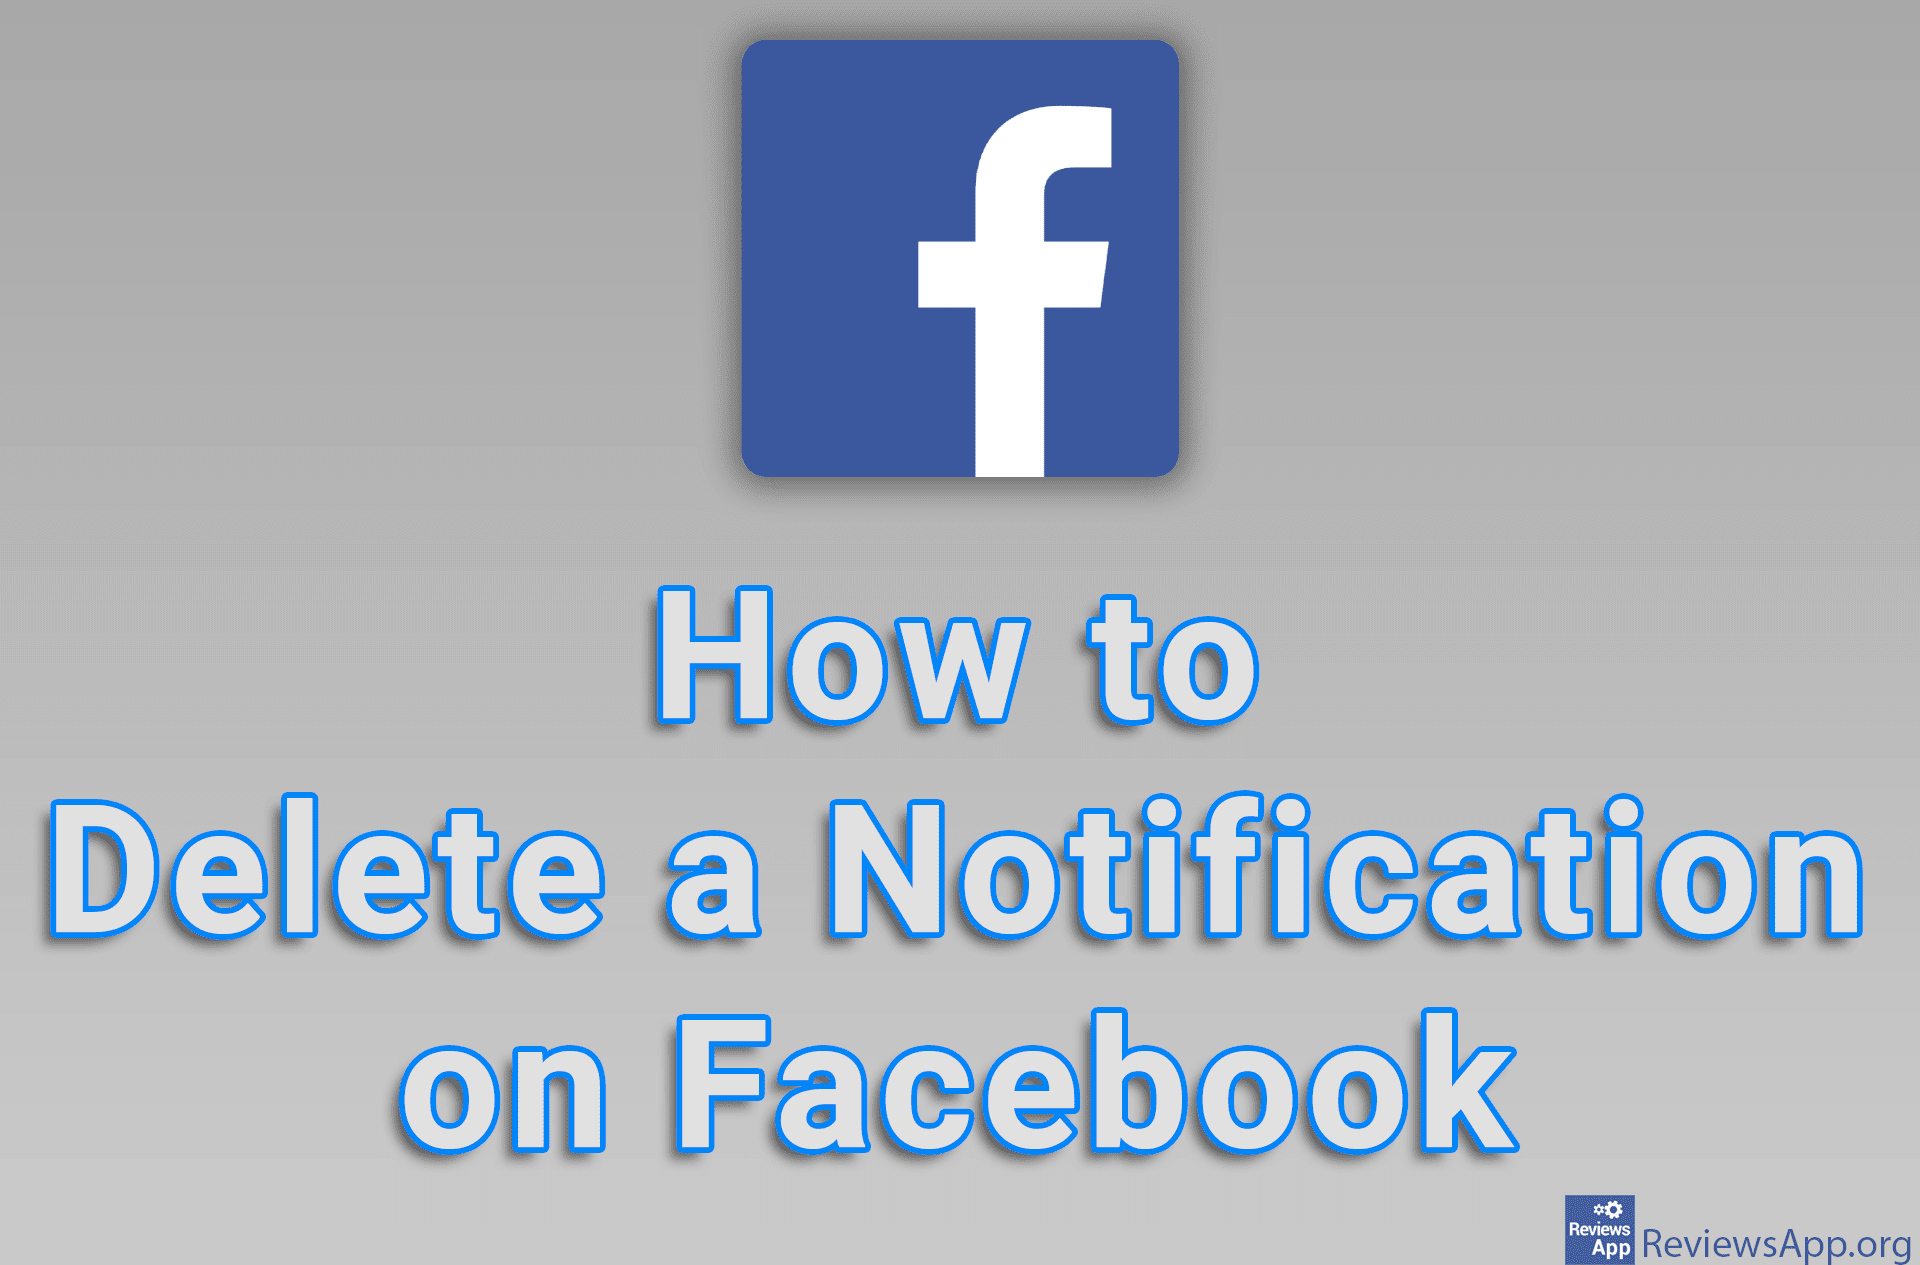 How to Delete a Notification on Facebook